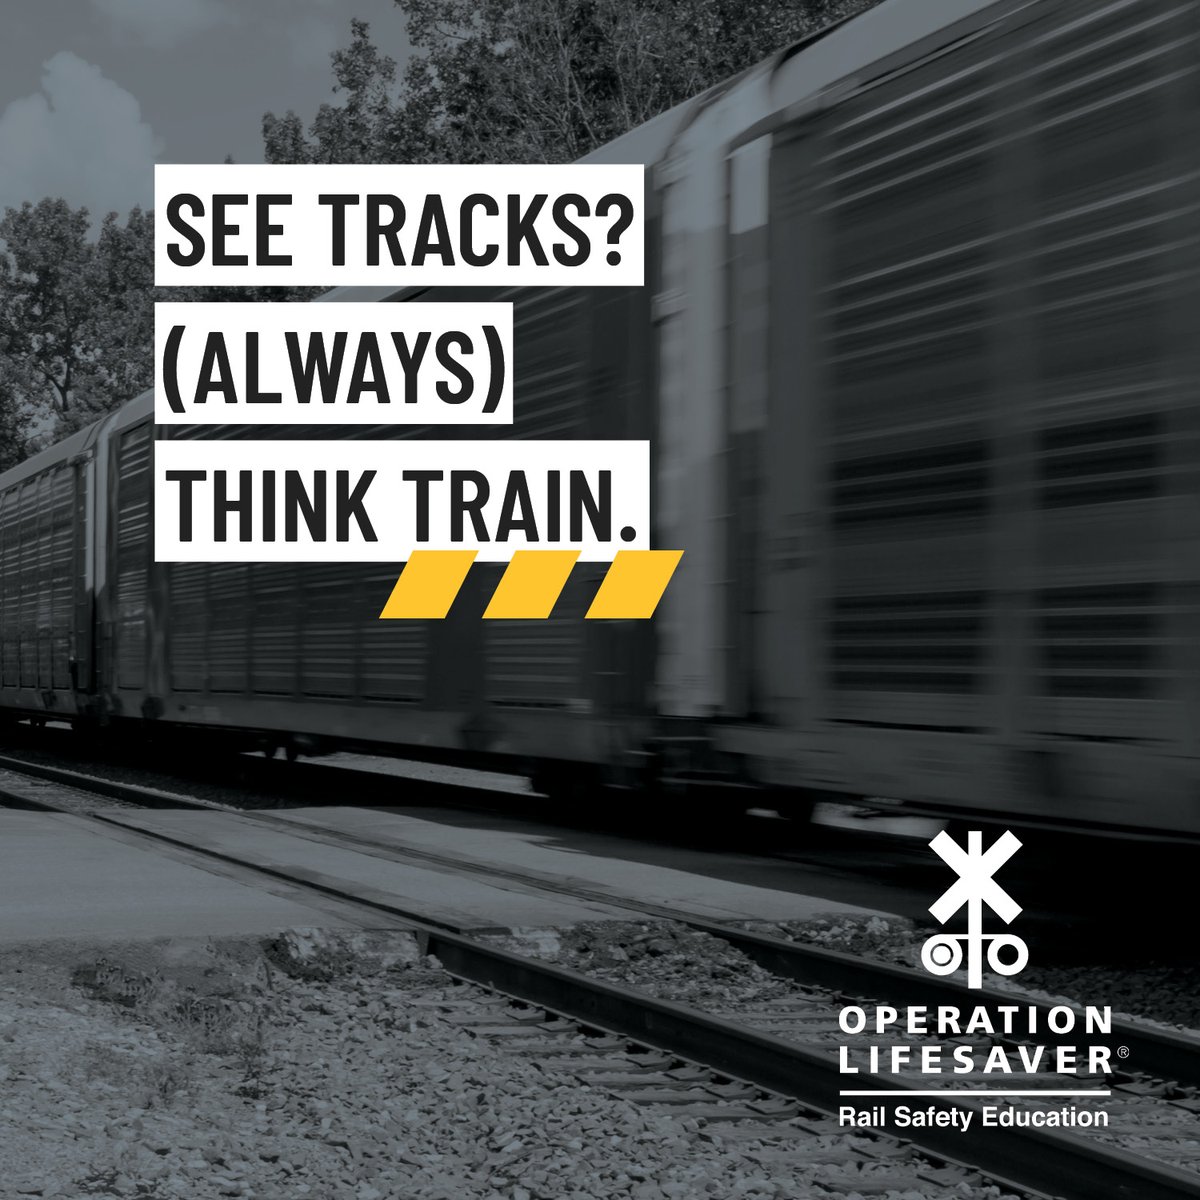 Today is #NationalTrainDay!

Be safe, always expect a train. 

#SeeTracksThinkTrain #RailSafety